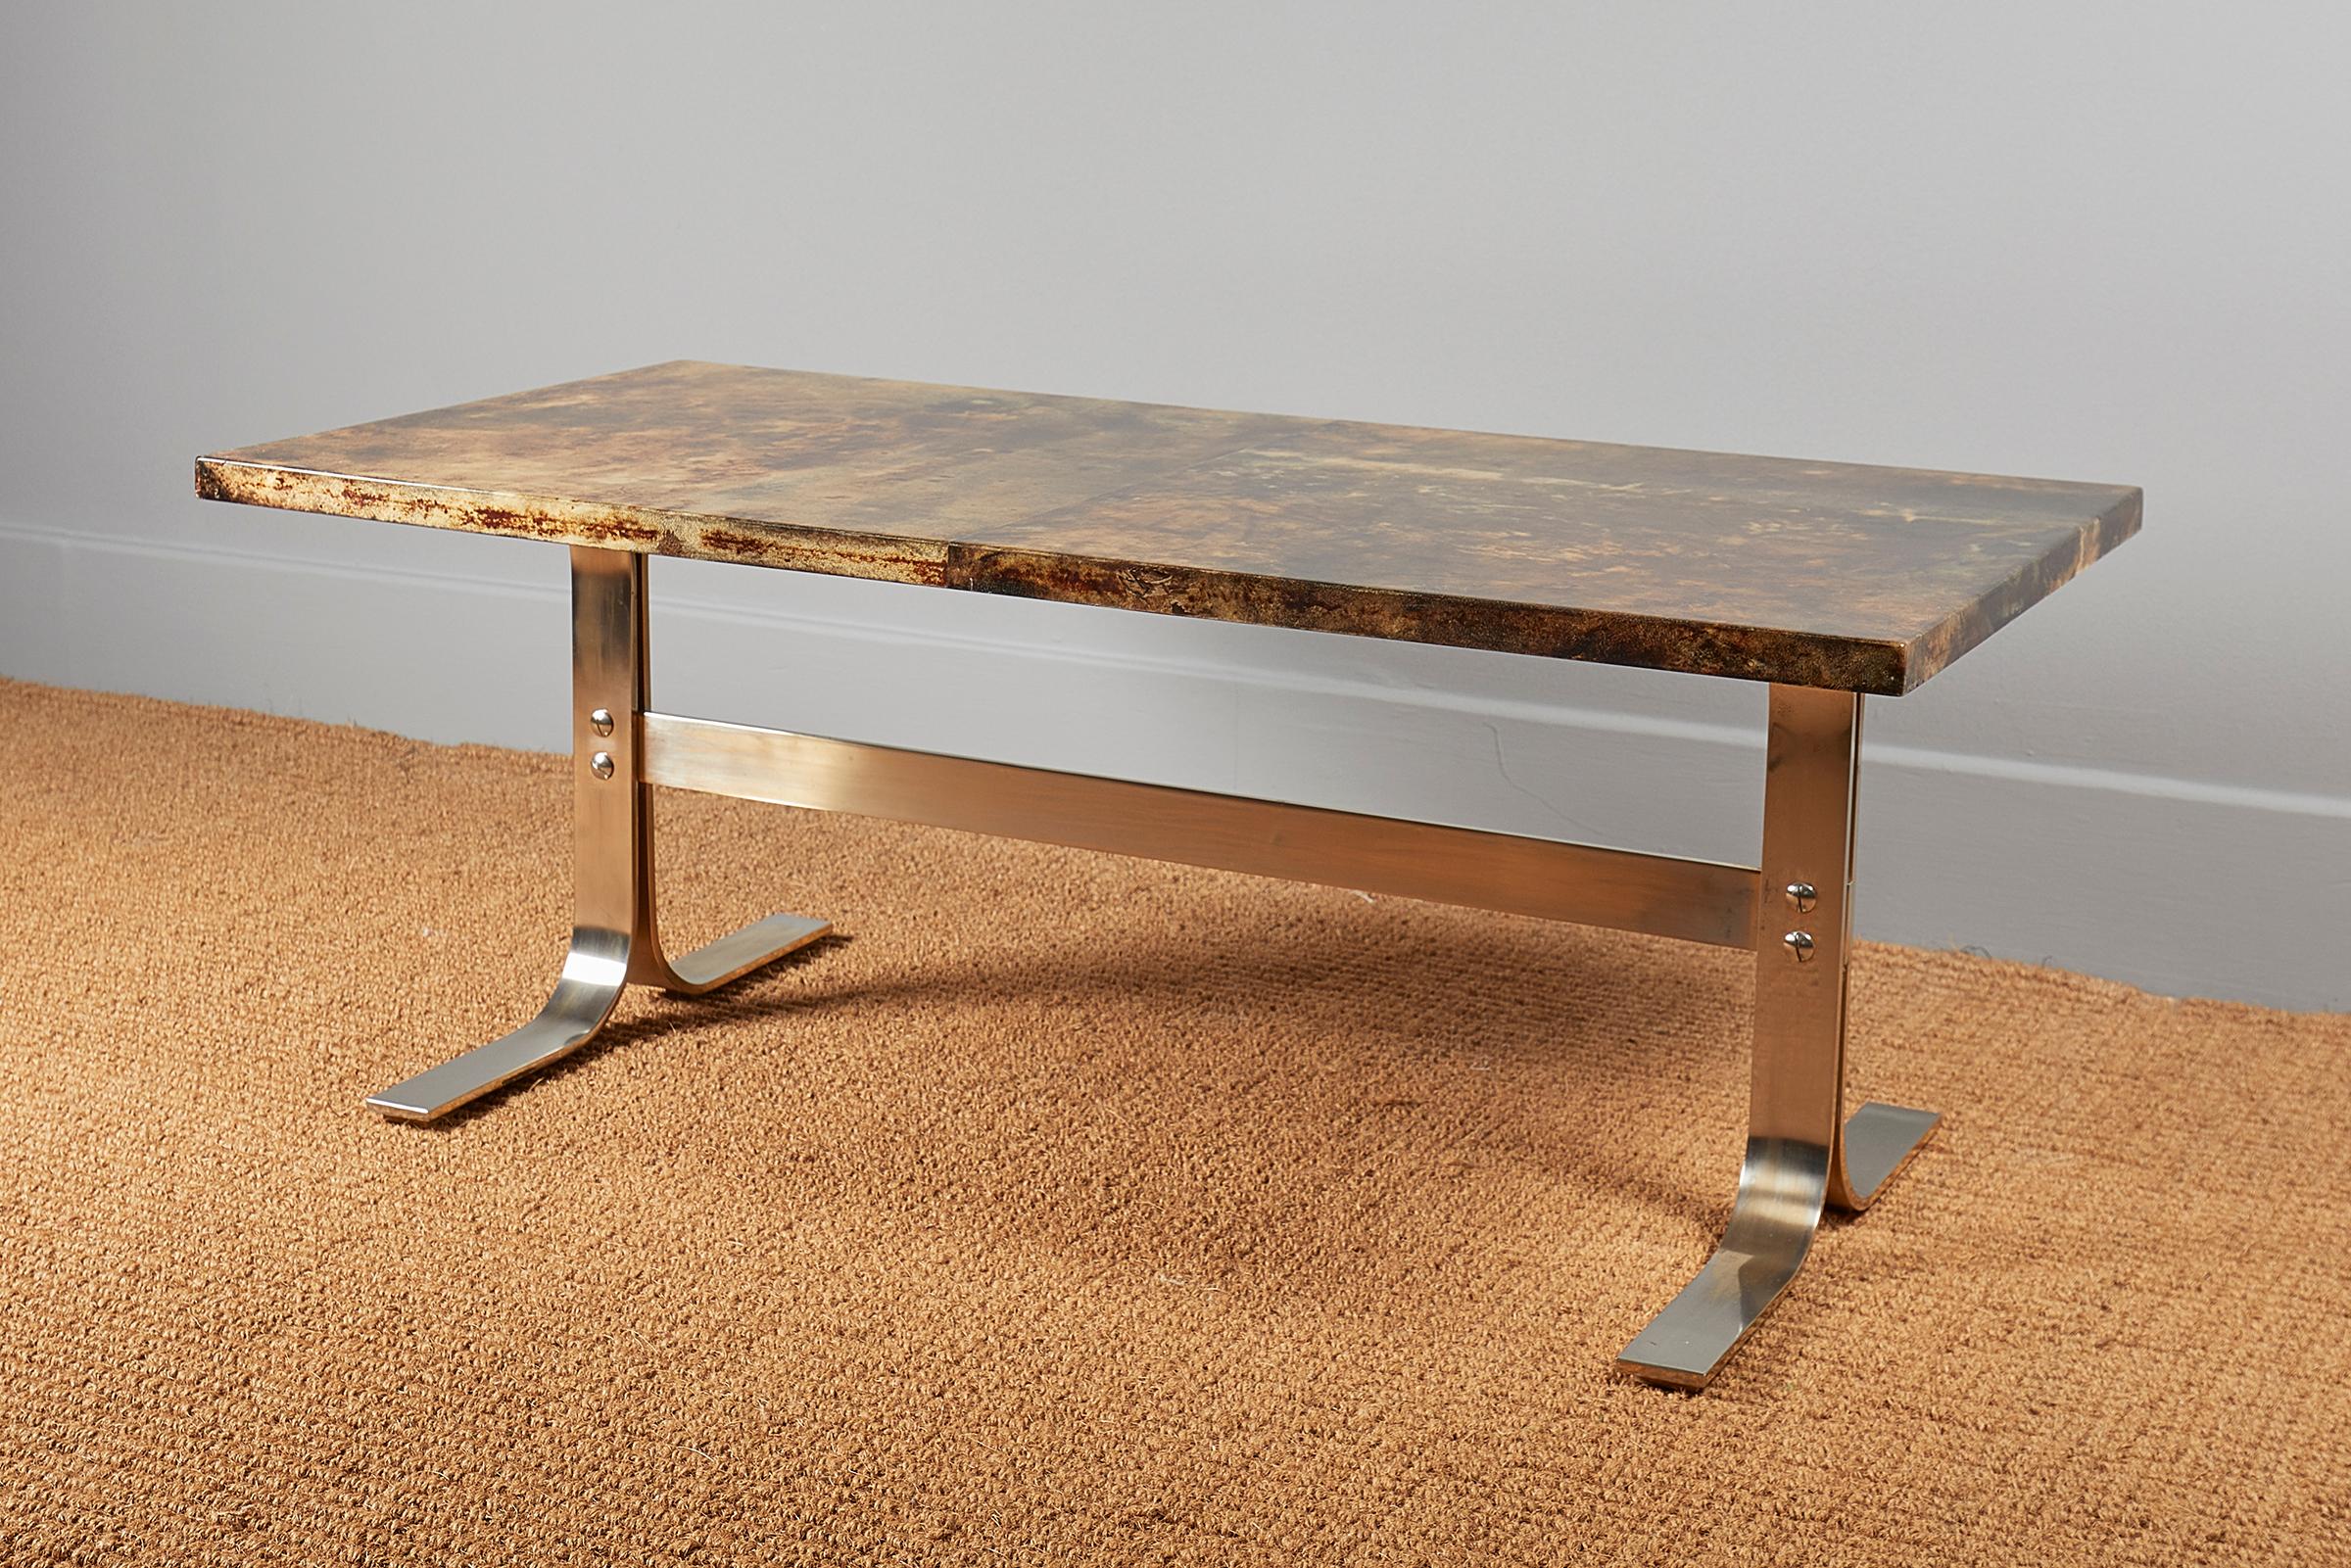 20th Century Aldo Tura Lacquered Parchment Coffee Table, Italy, 1960s